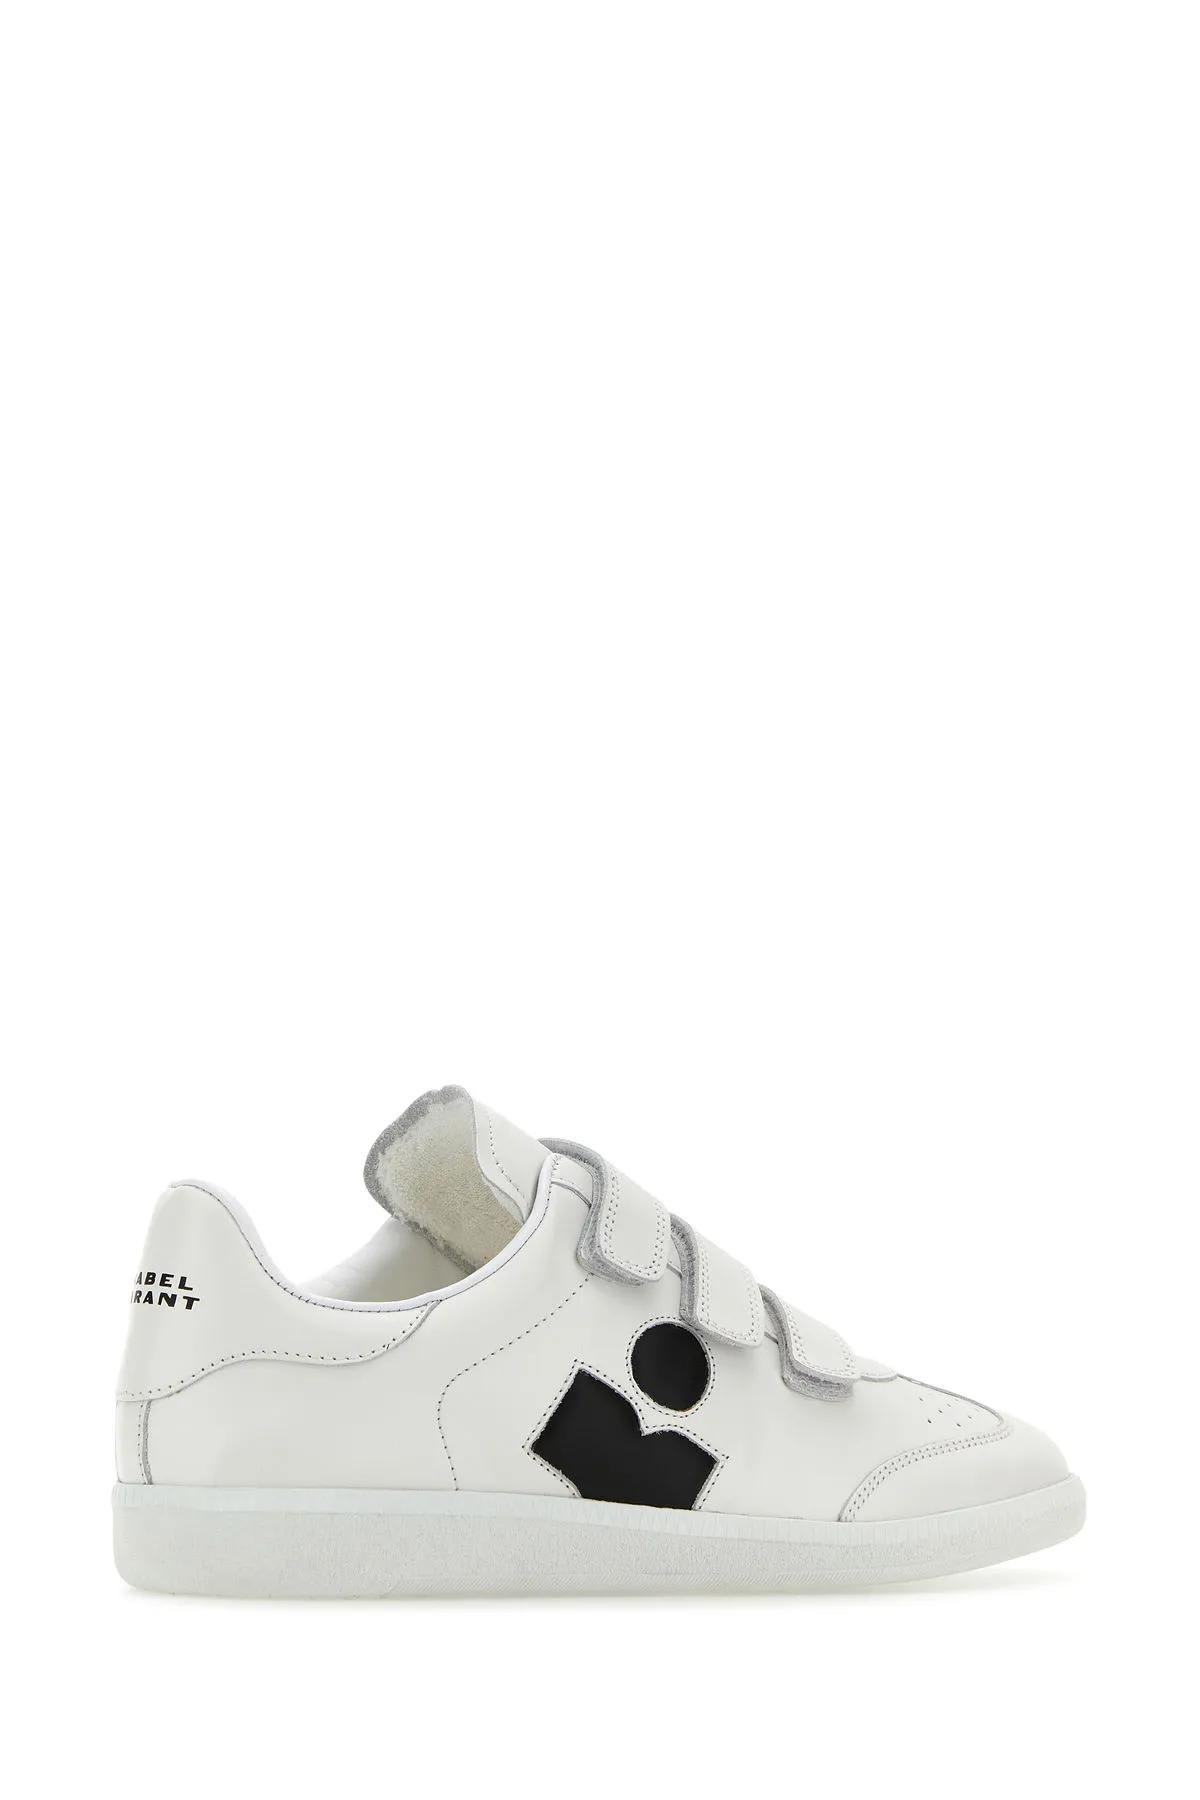 Shop Isabel Marant White Leather Logo Classic Sn Sneakers